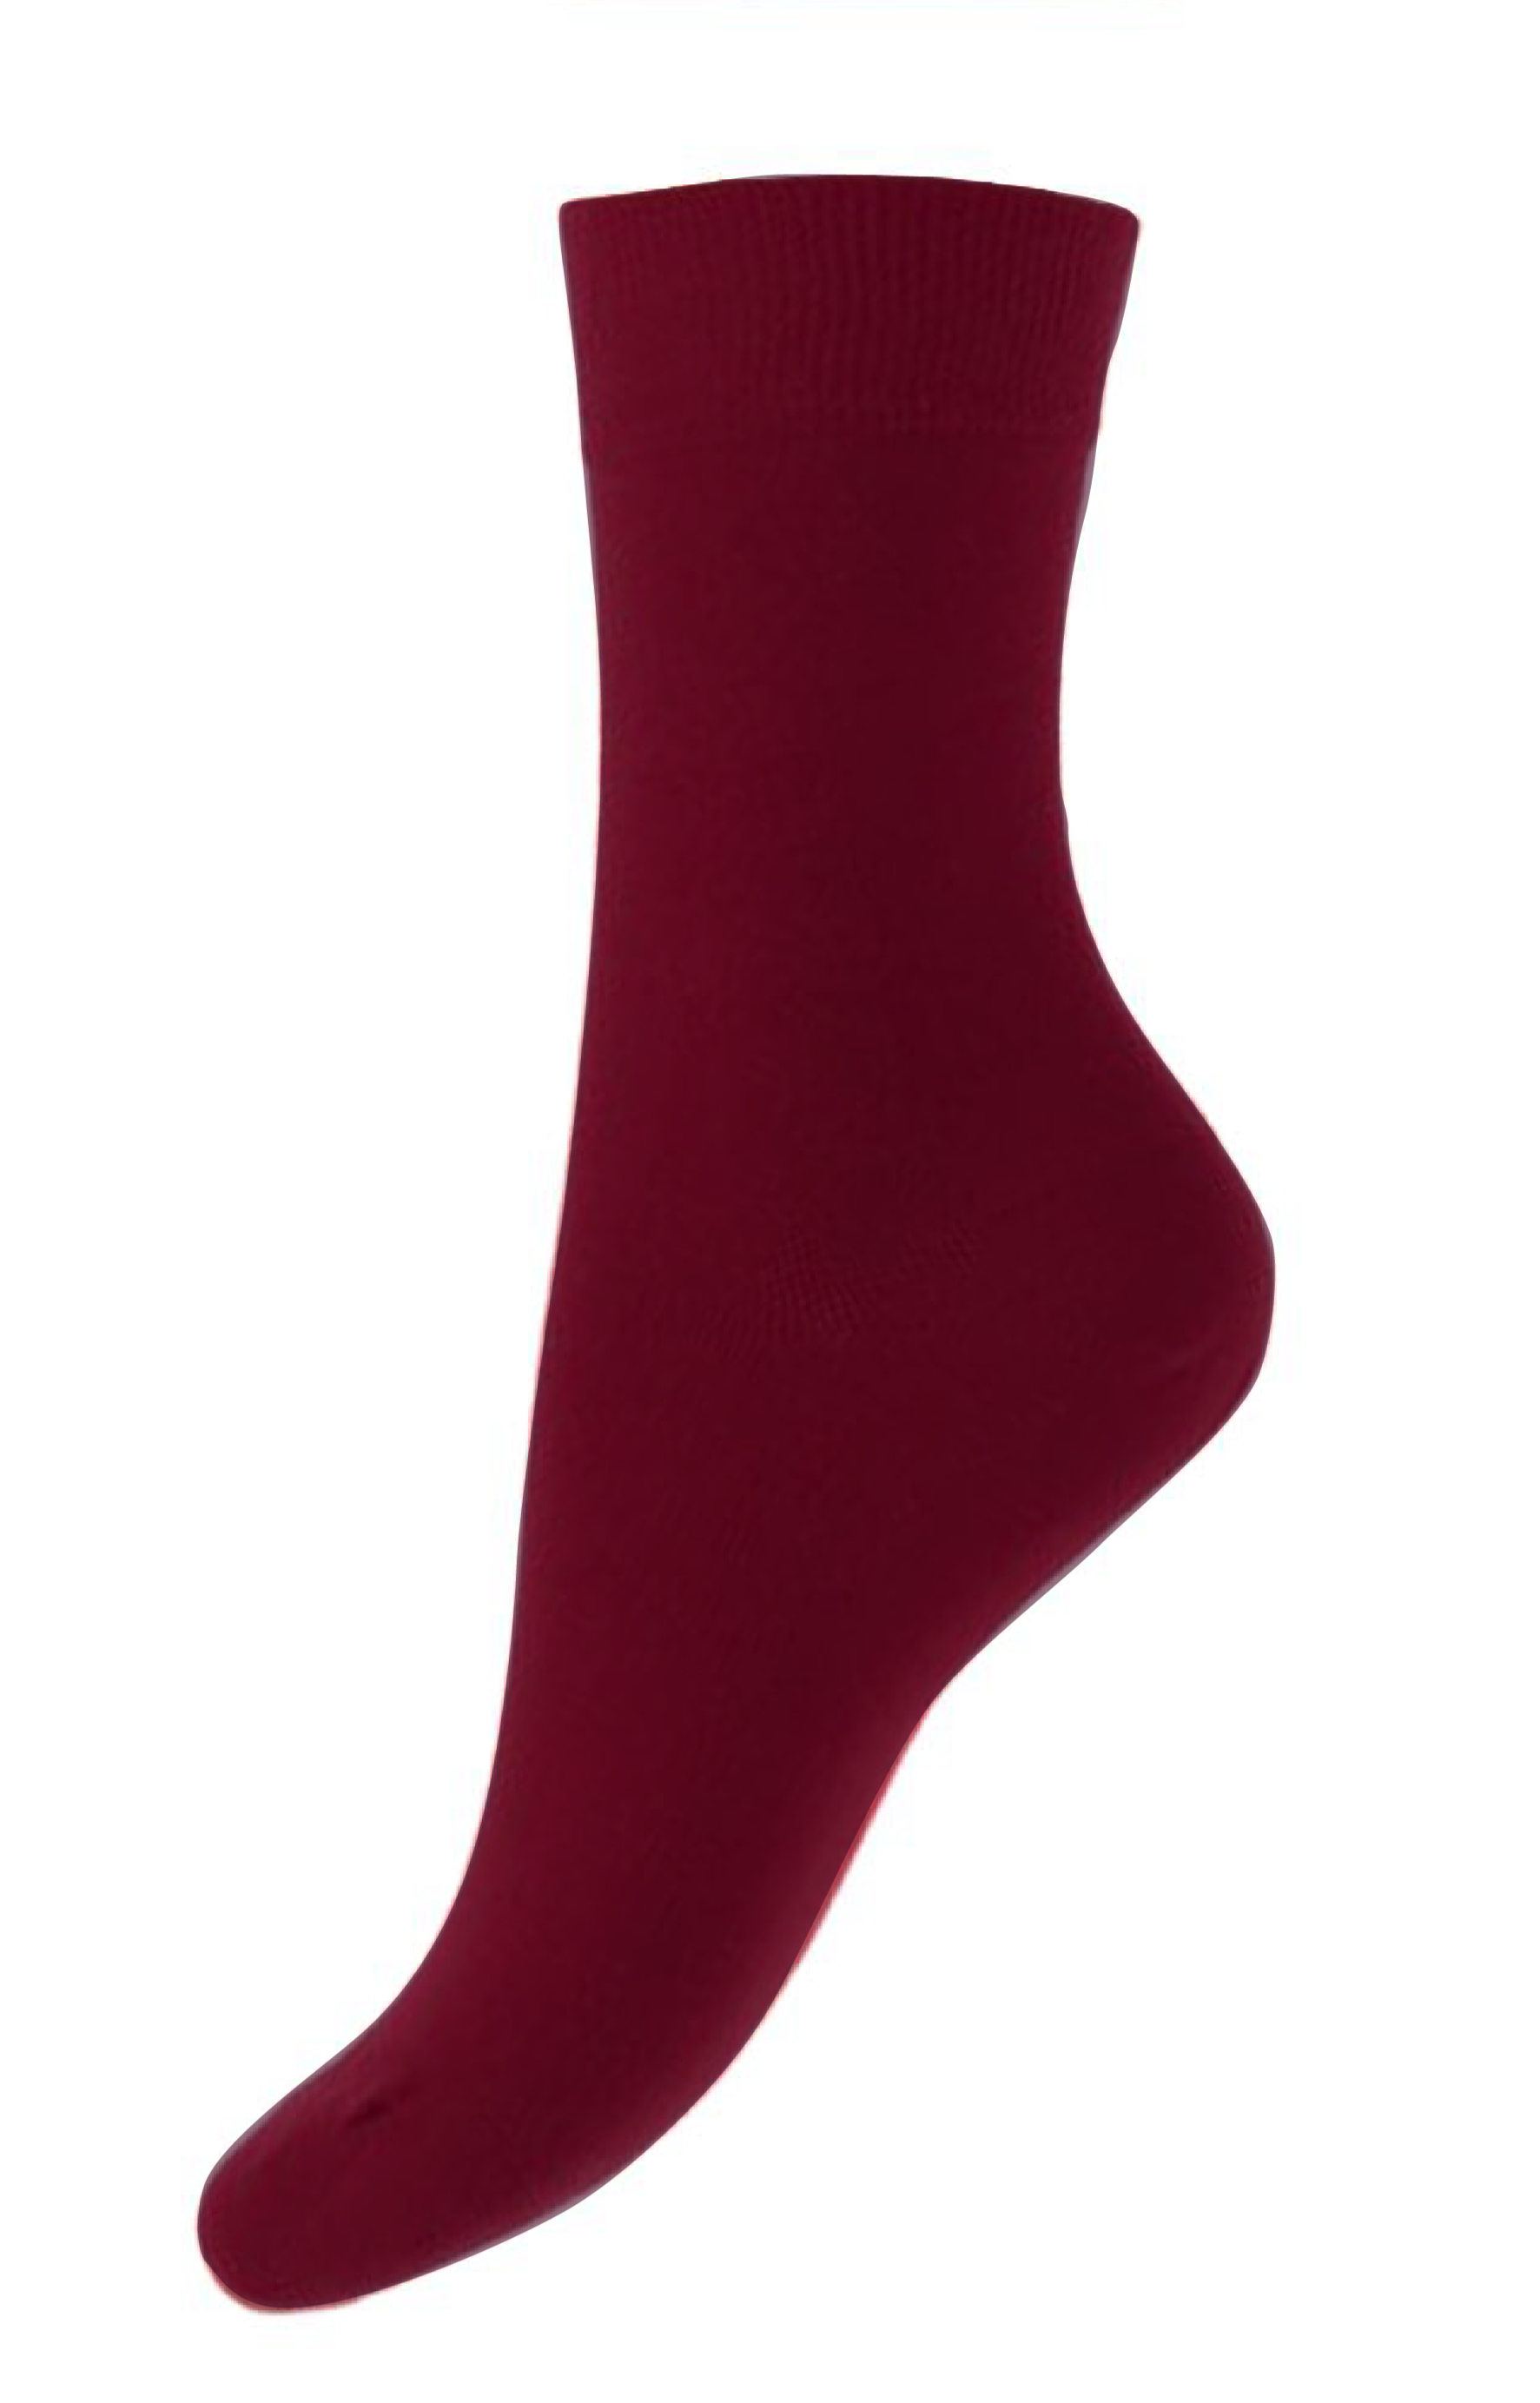 Bonnie Doon 83422 / BD632401 Cotton Sock - wine ankle socks available in men and women sizes